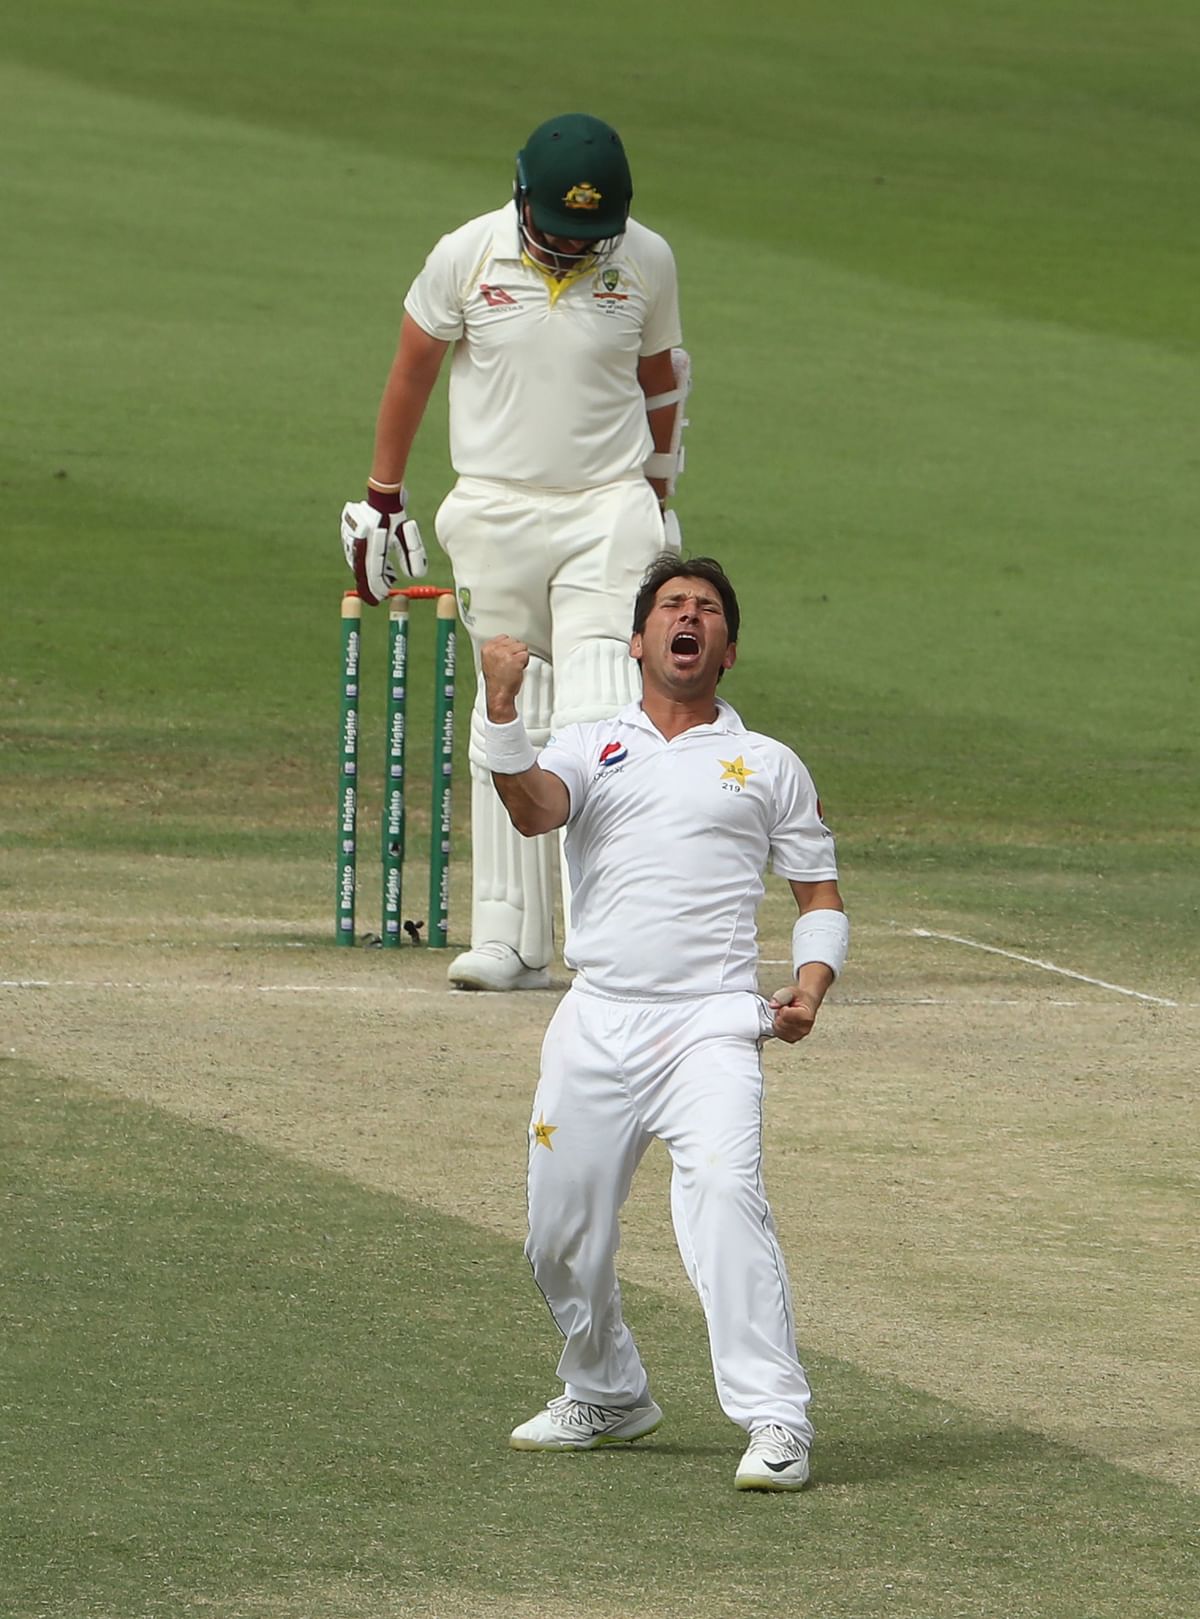 Pakistan cricketer Yasir Shah celebrates after taking the final wicket of the match at the end of day four of the second Test cricket match between Australia and Pakistan at Sheikh Zayed stadium in Abu Dhabi on 19 October, 2018. Photo: AFP